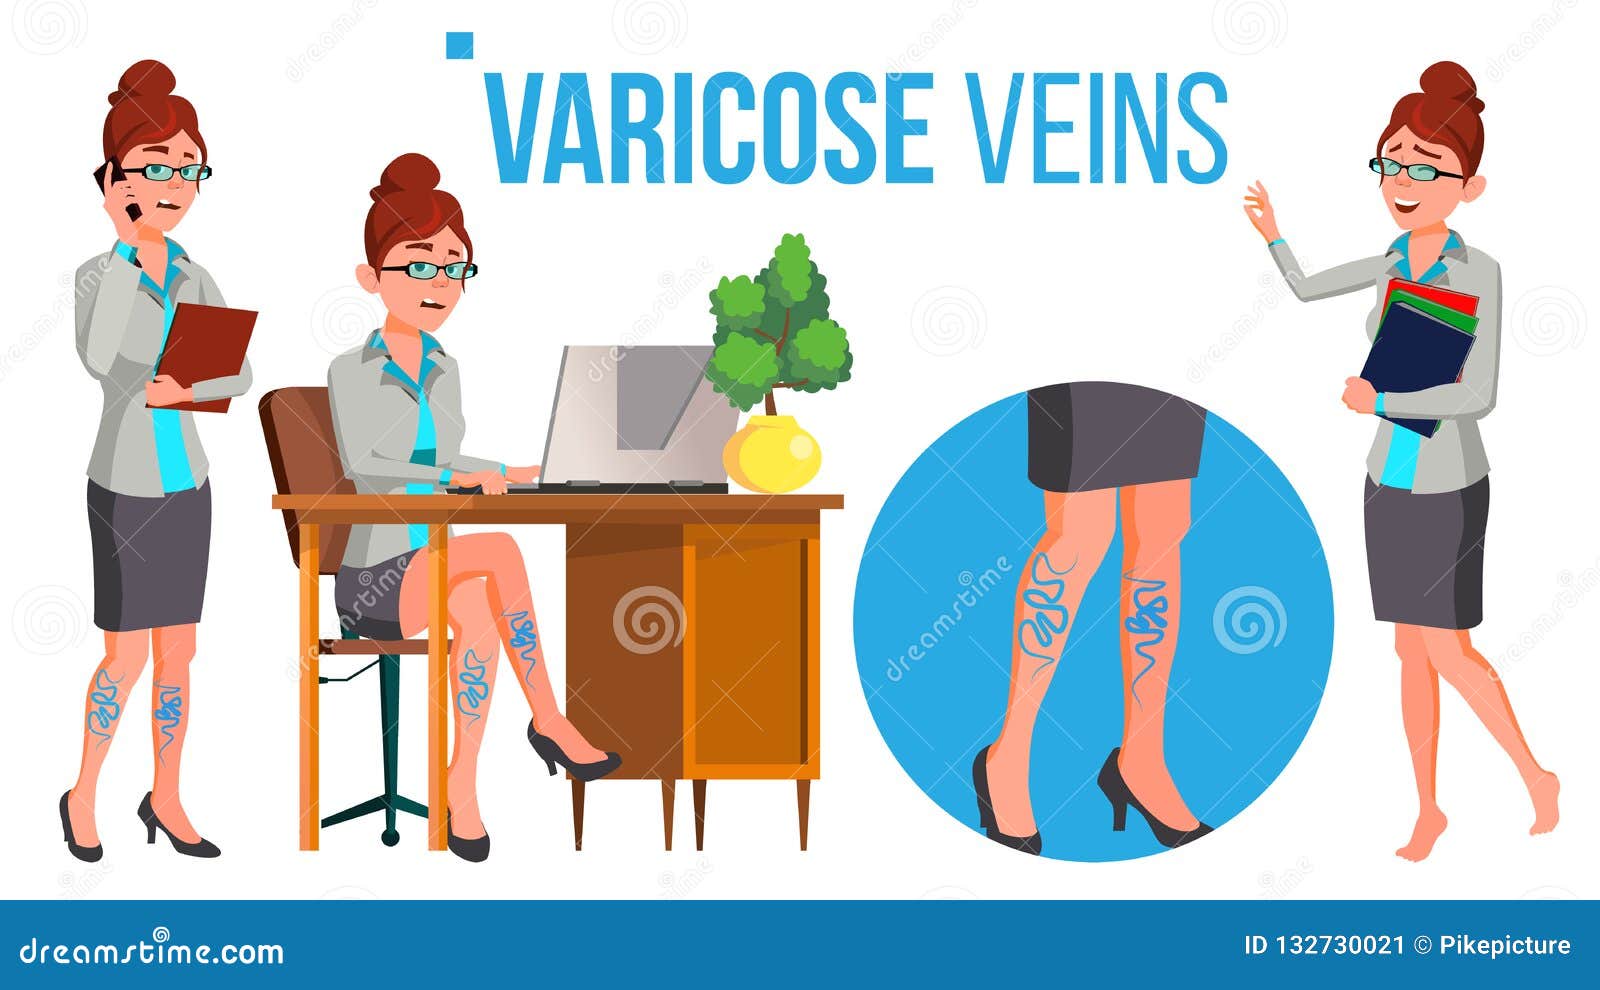 Female Legs in High Heel Shoes with Varicose Veins Vector. Isolated Cartoon  Illustration Stock Vector - Illustration of female, disease: 132730021